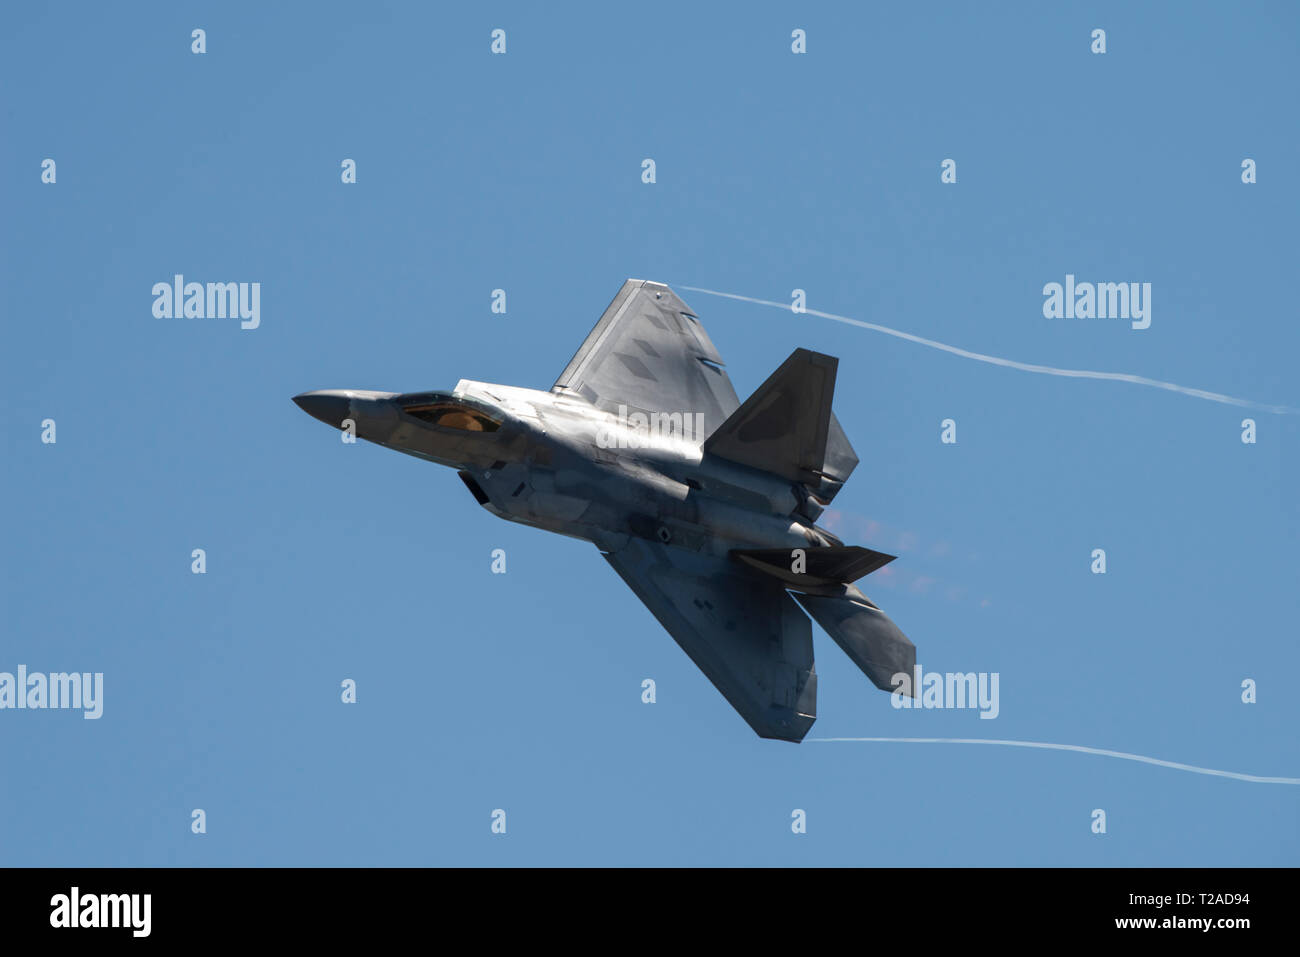 A U.S. Air Force F-22 Raptor stealth fighter aircraft performs aerial maneuvers during the Thunder Over the Bay air show at Travis Air Force Base March 30, 2019 in Fairfield, California. Stock Photo